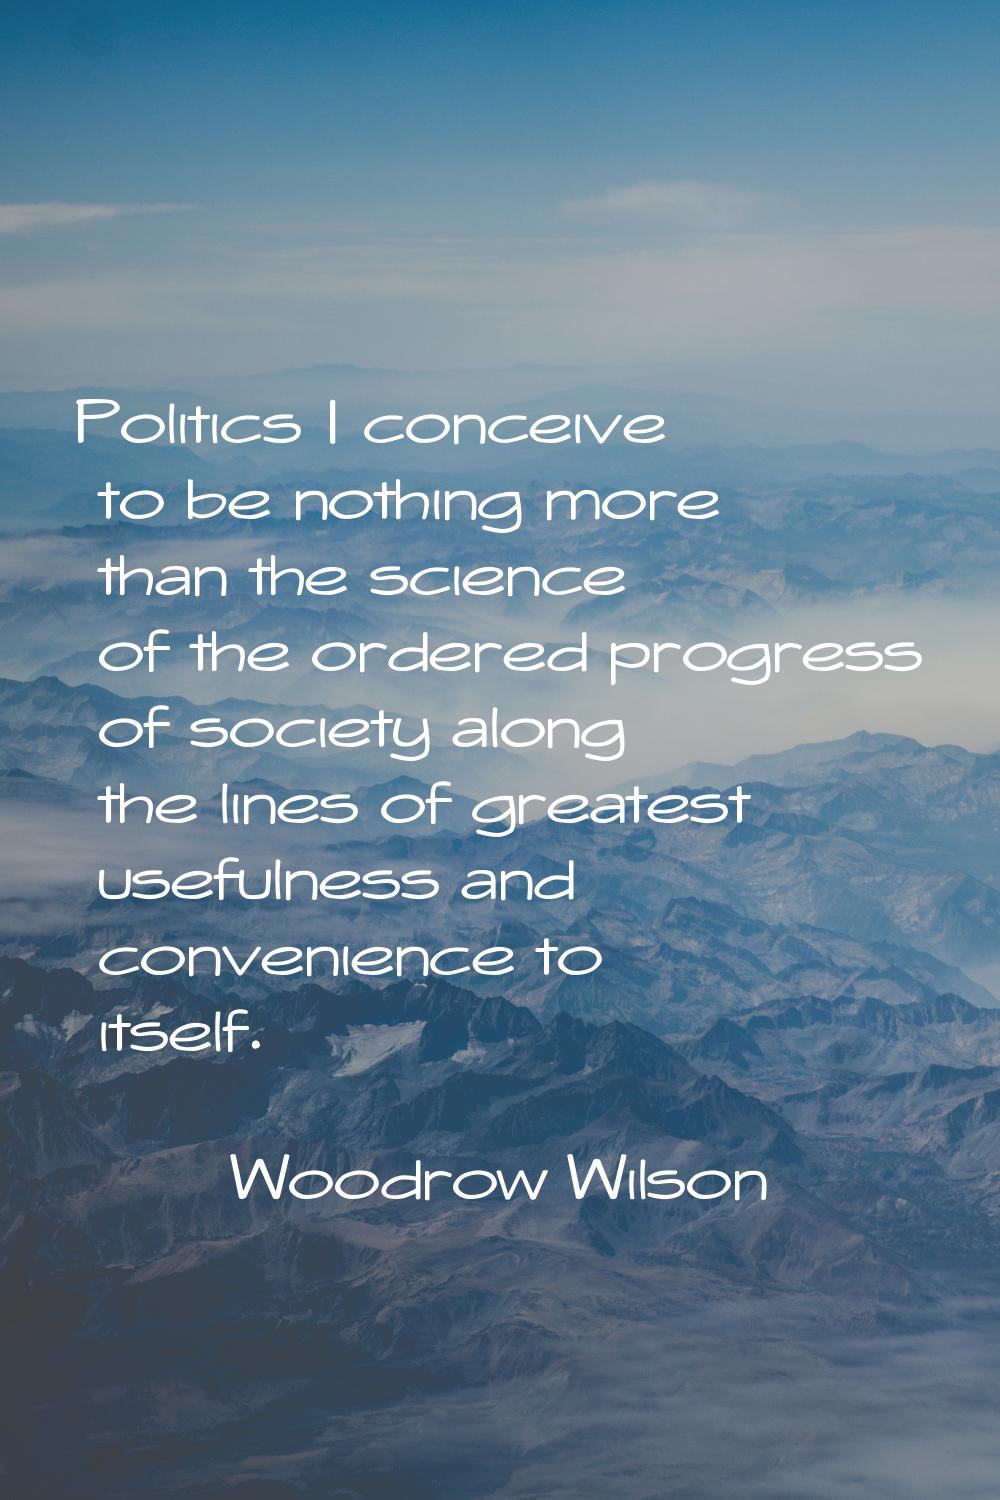 Politics I conceive to be nothing more than the science of the ordered progress of society along th